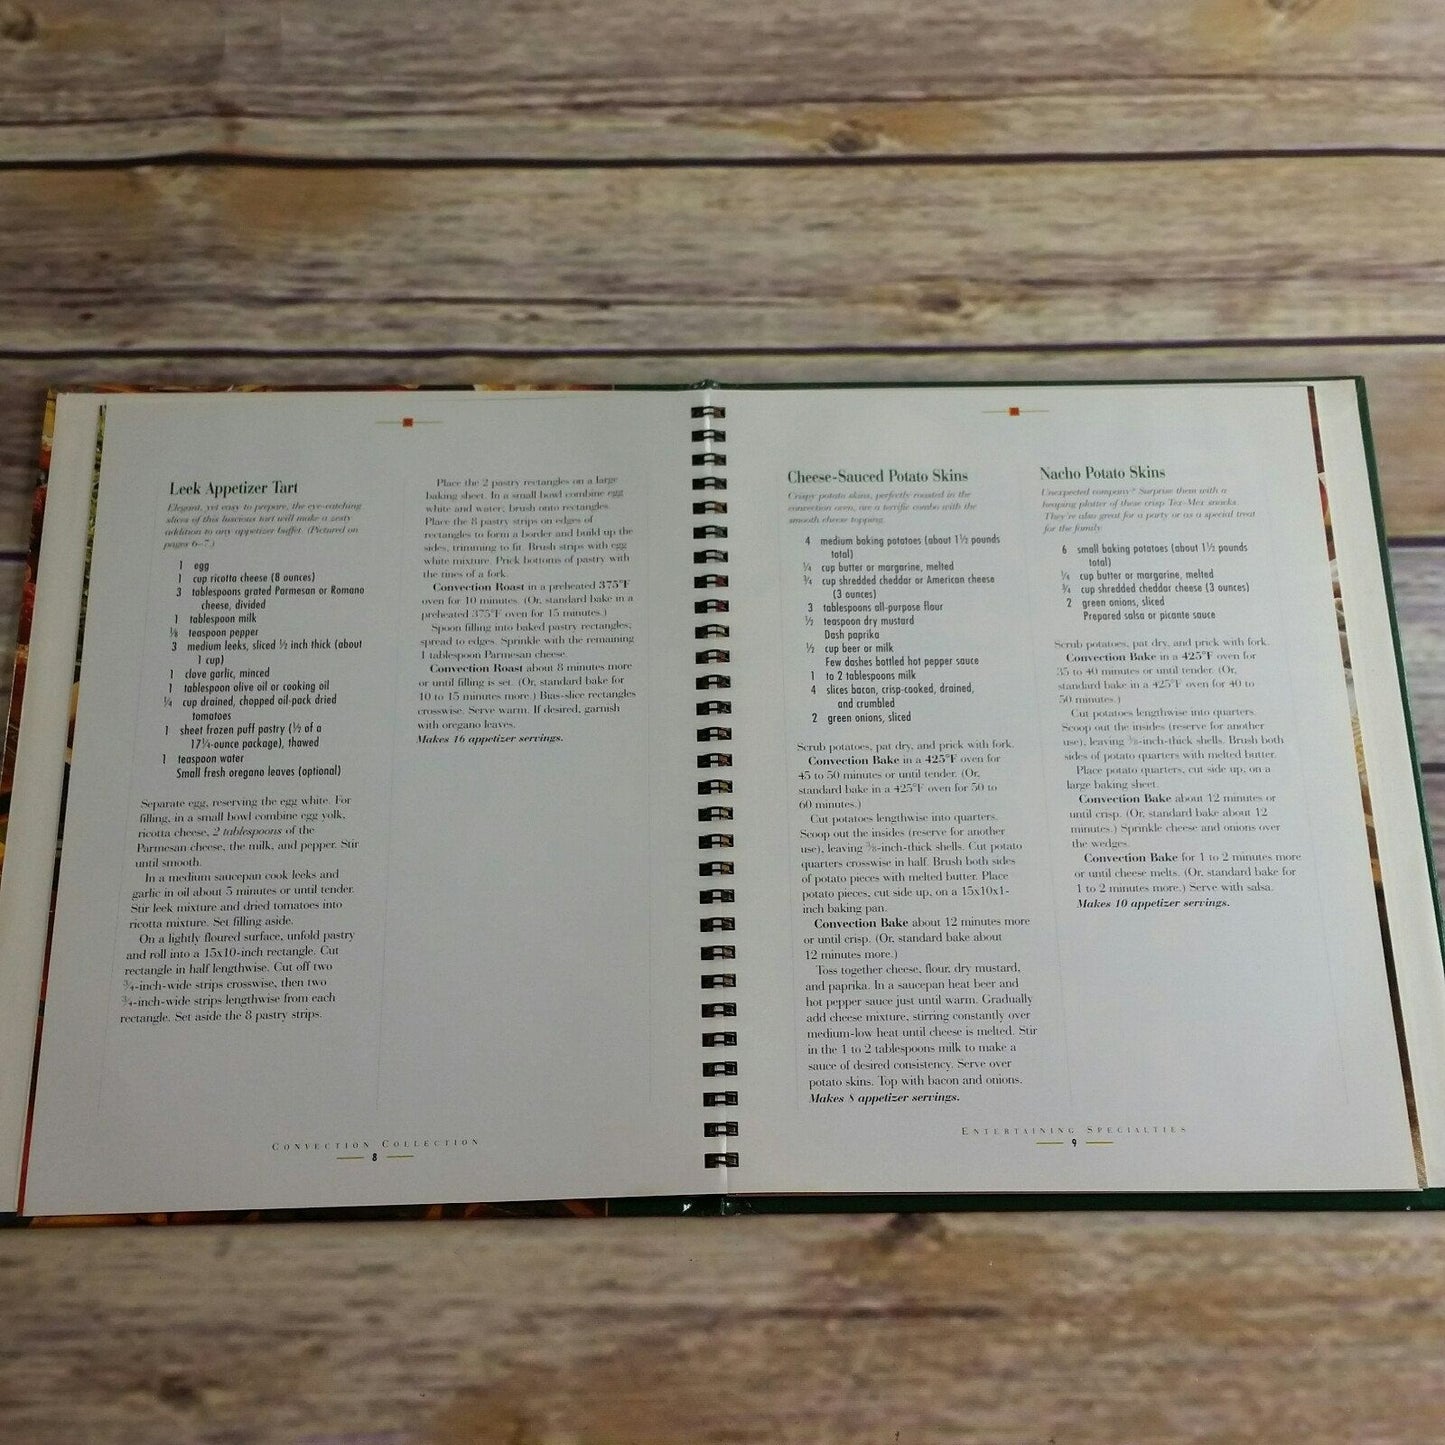 Vintage Kitchen Aid Cookbook Convection Collection Recipes Book 1995 Spiral Bound Hardcover 112 Recipes Whirlpool KitchenAid